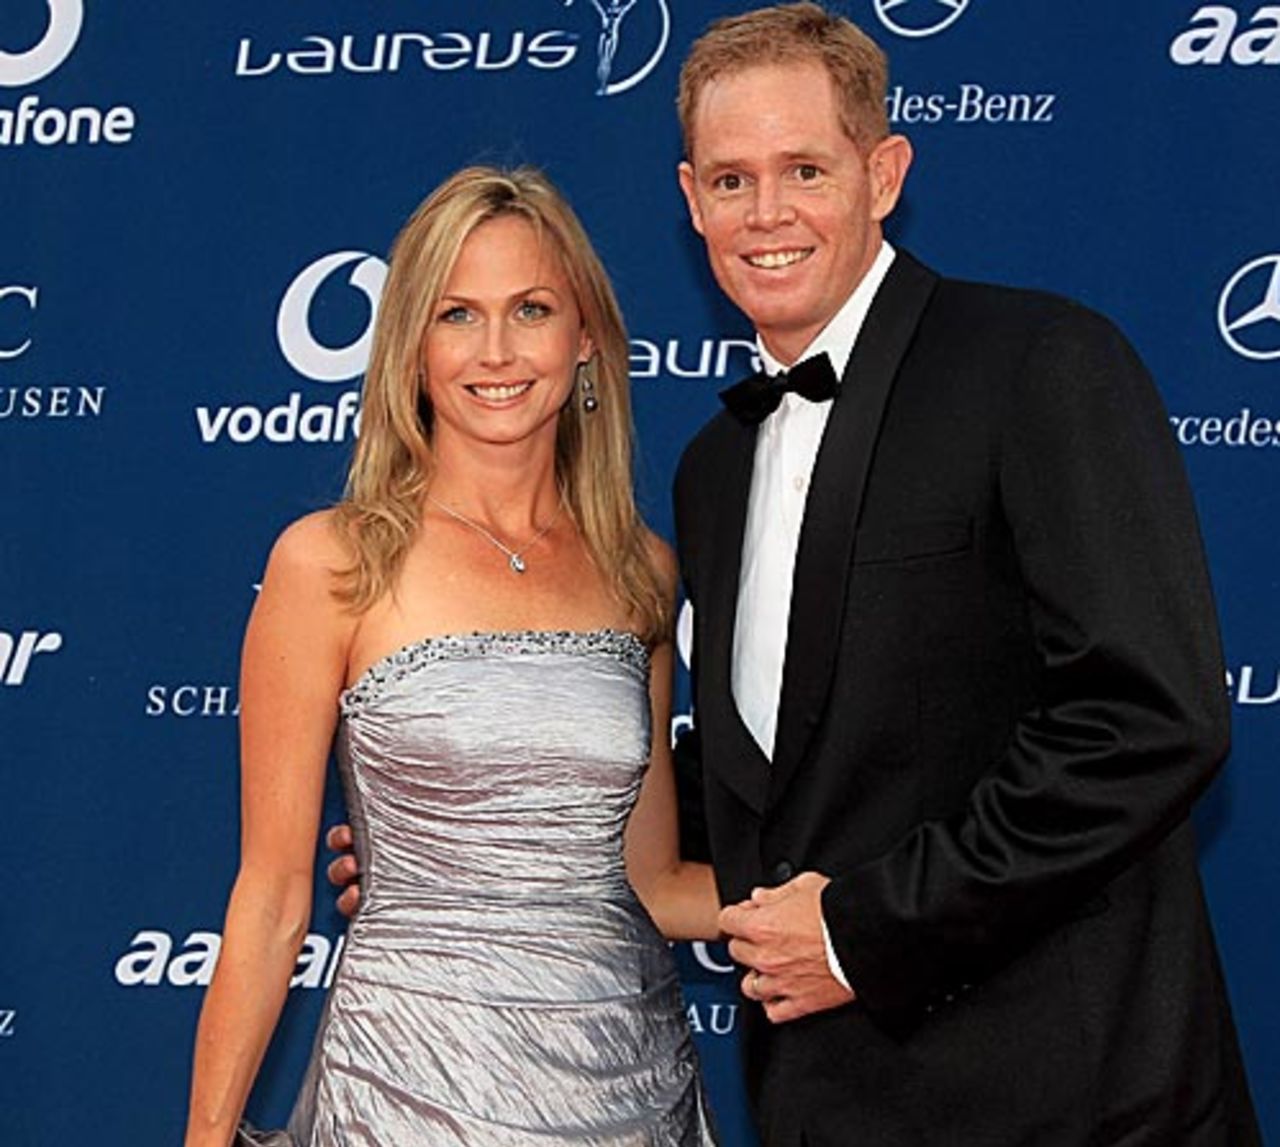 Shaun Pollock with his wife Patricia Lauderdale at the Laureus Sports Awards 2010, March 10, 2010